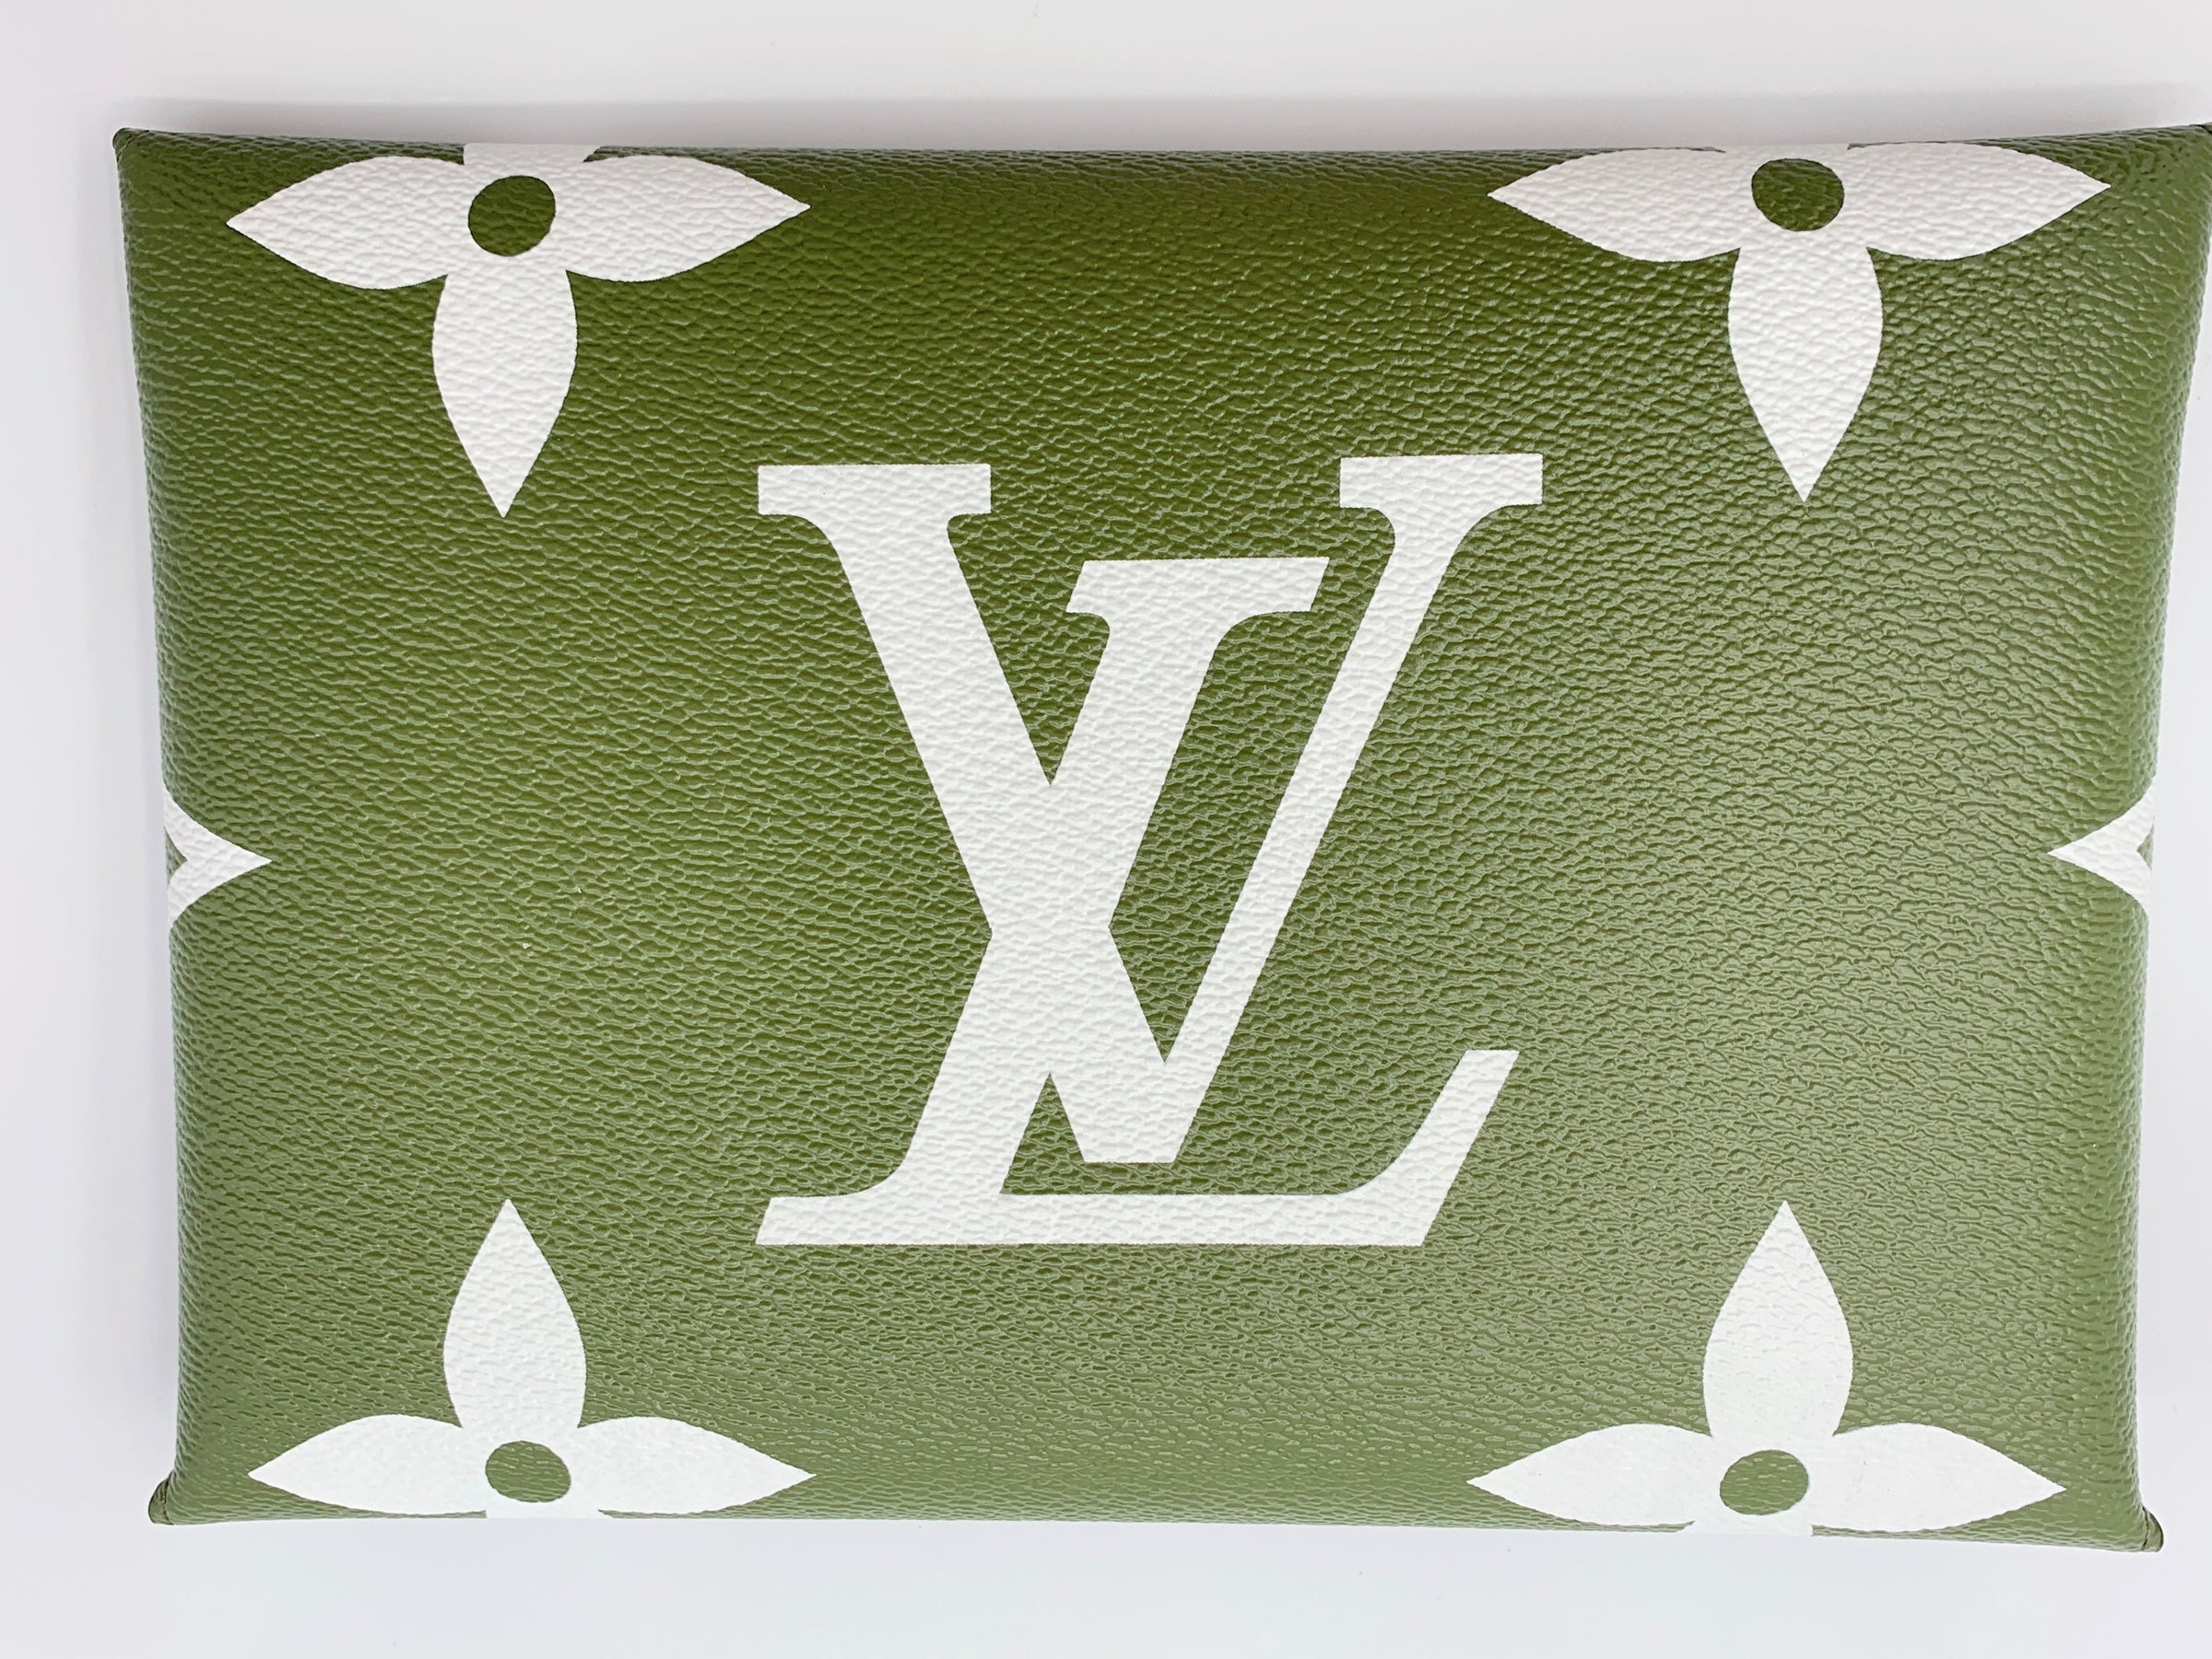 NEW LOUIS VUITTON KIRIGAMI GREEN GIANT MONOGRAM LARGE Snap Pouch With Chain  $890.00 - PicClick